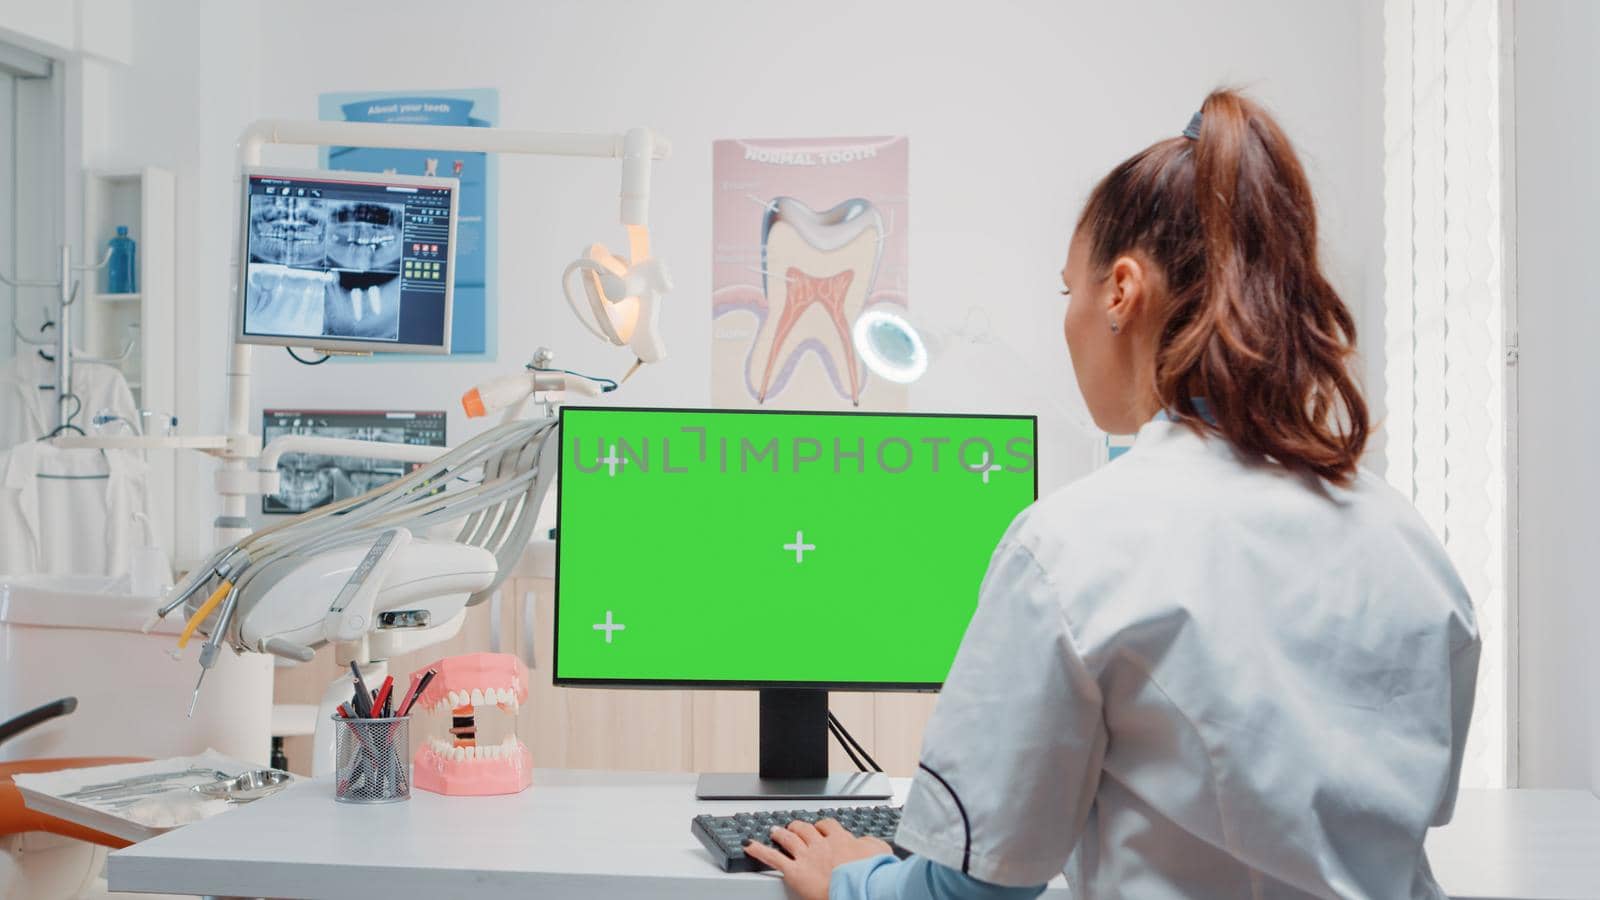 Woman using keyboard and computer with green screen in dental cabinet for oral care. Dentist working with chroma key on monitor with isolated mockup template for dentition and dentistry